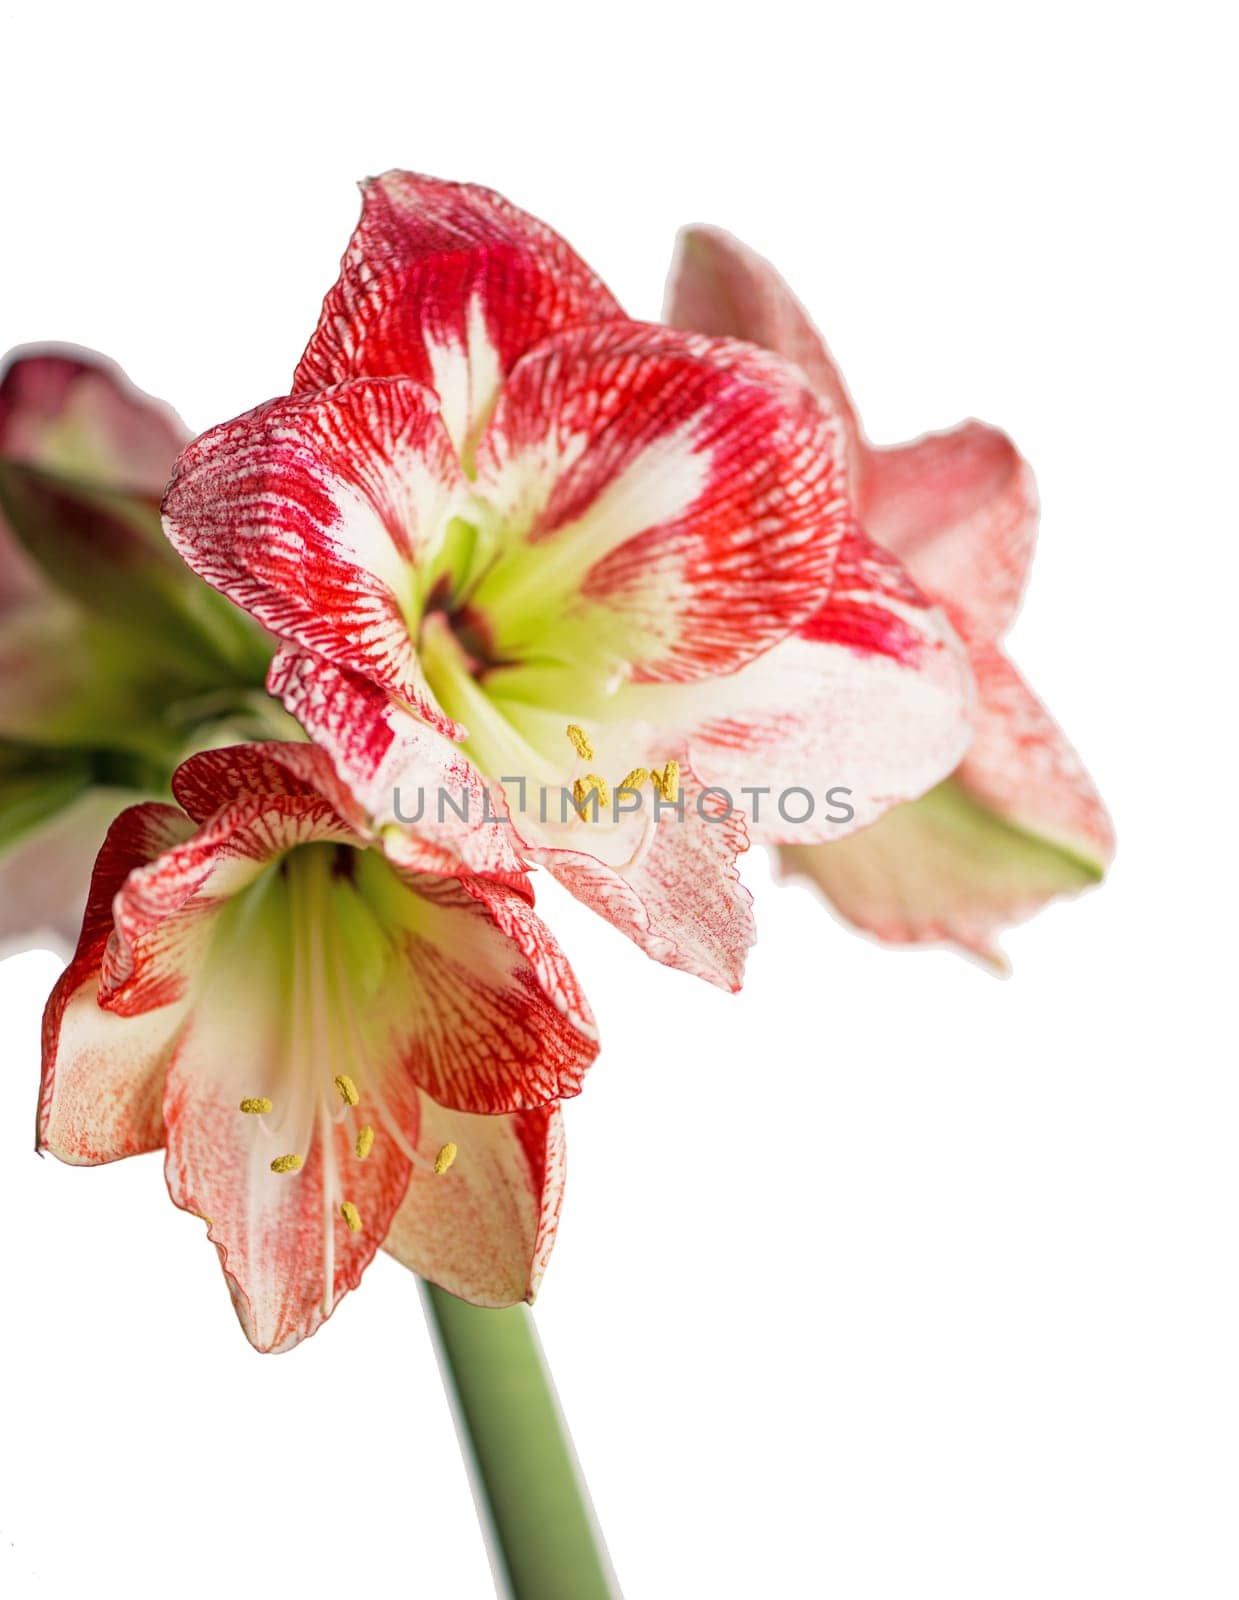 Hippeastrum or Amaryllis flowers ,Pink amaryllis flowers isolated on white background, with clipping path by aprilphoto